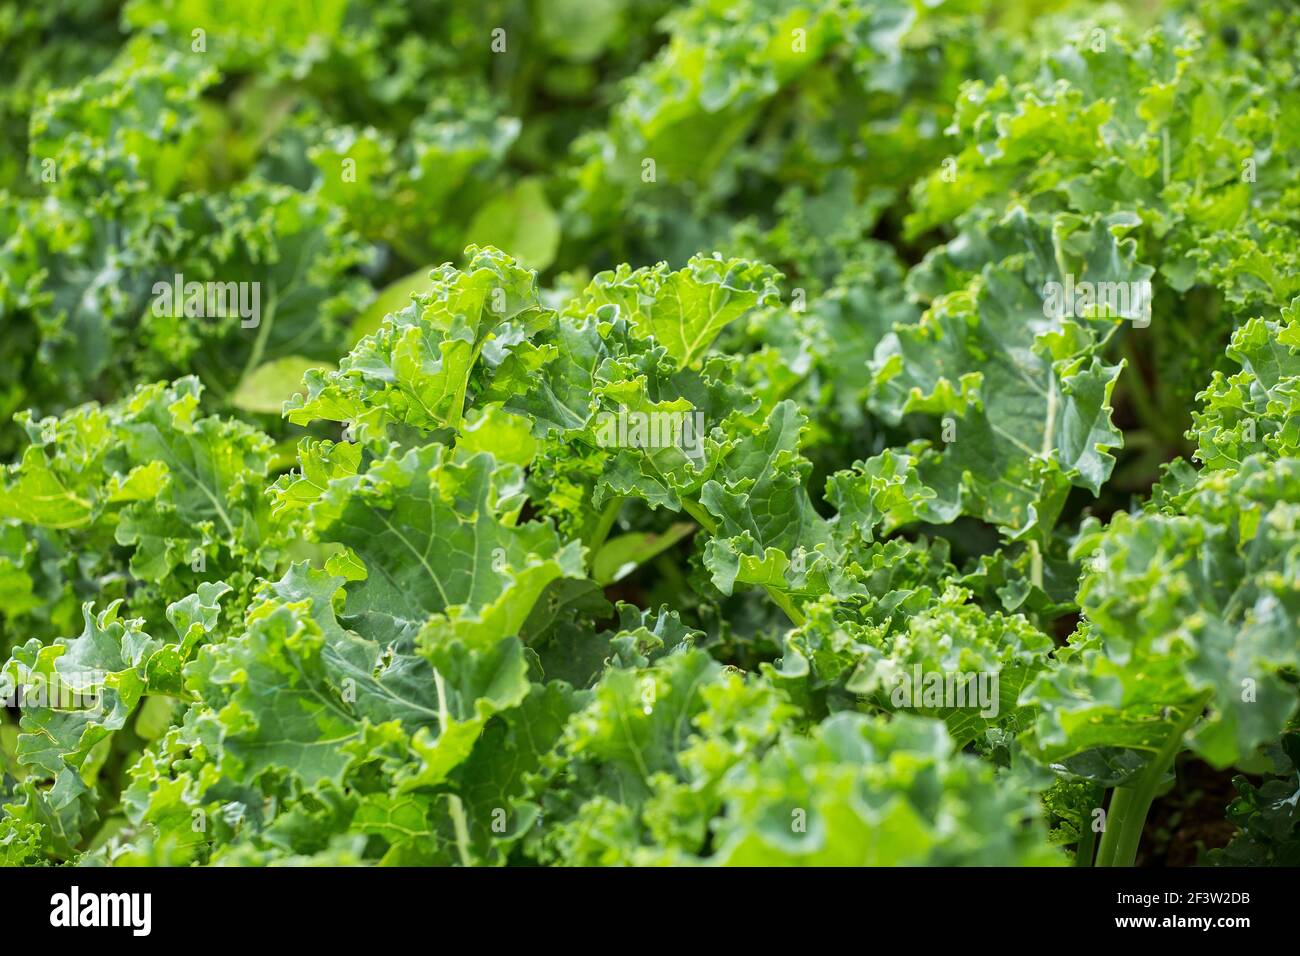 Green leaves of curly kale growing in greenhouse Stock Photo